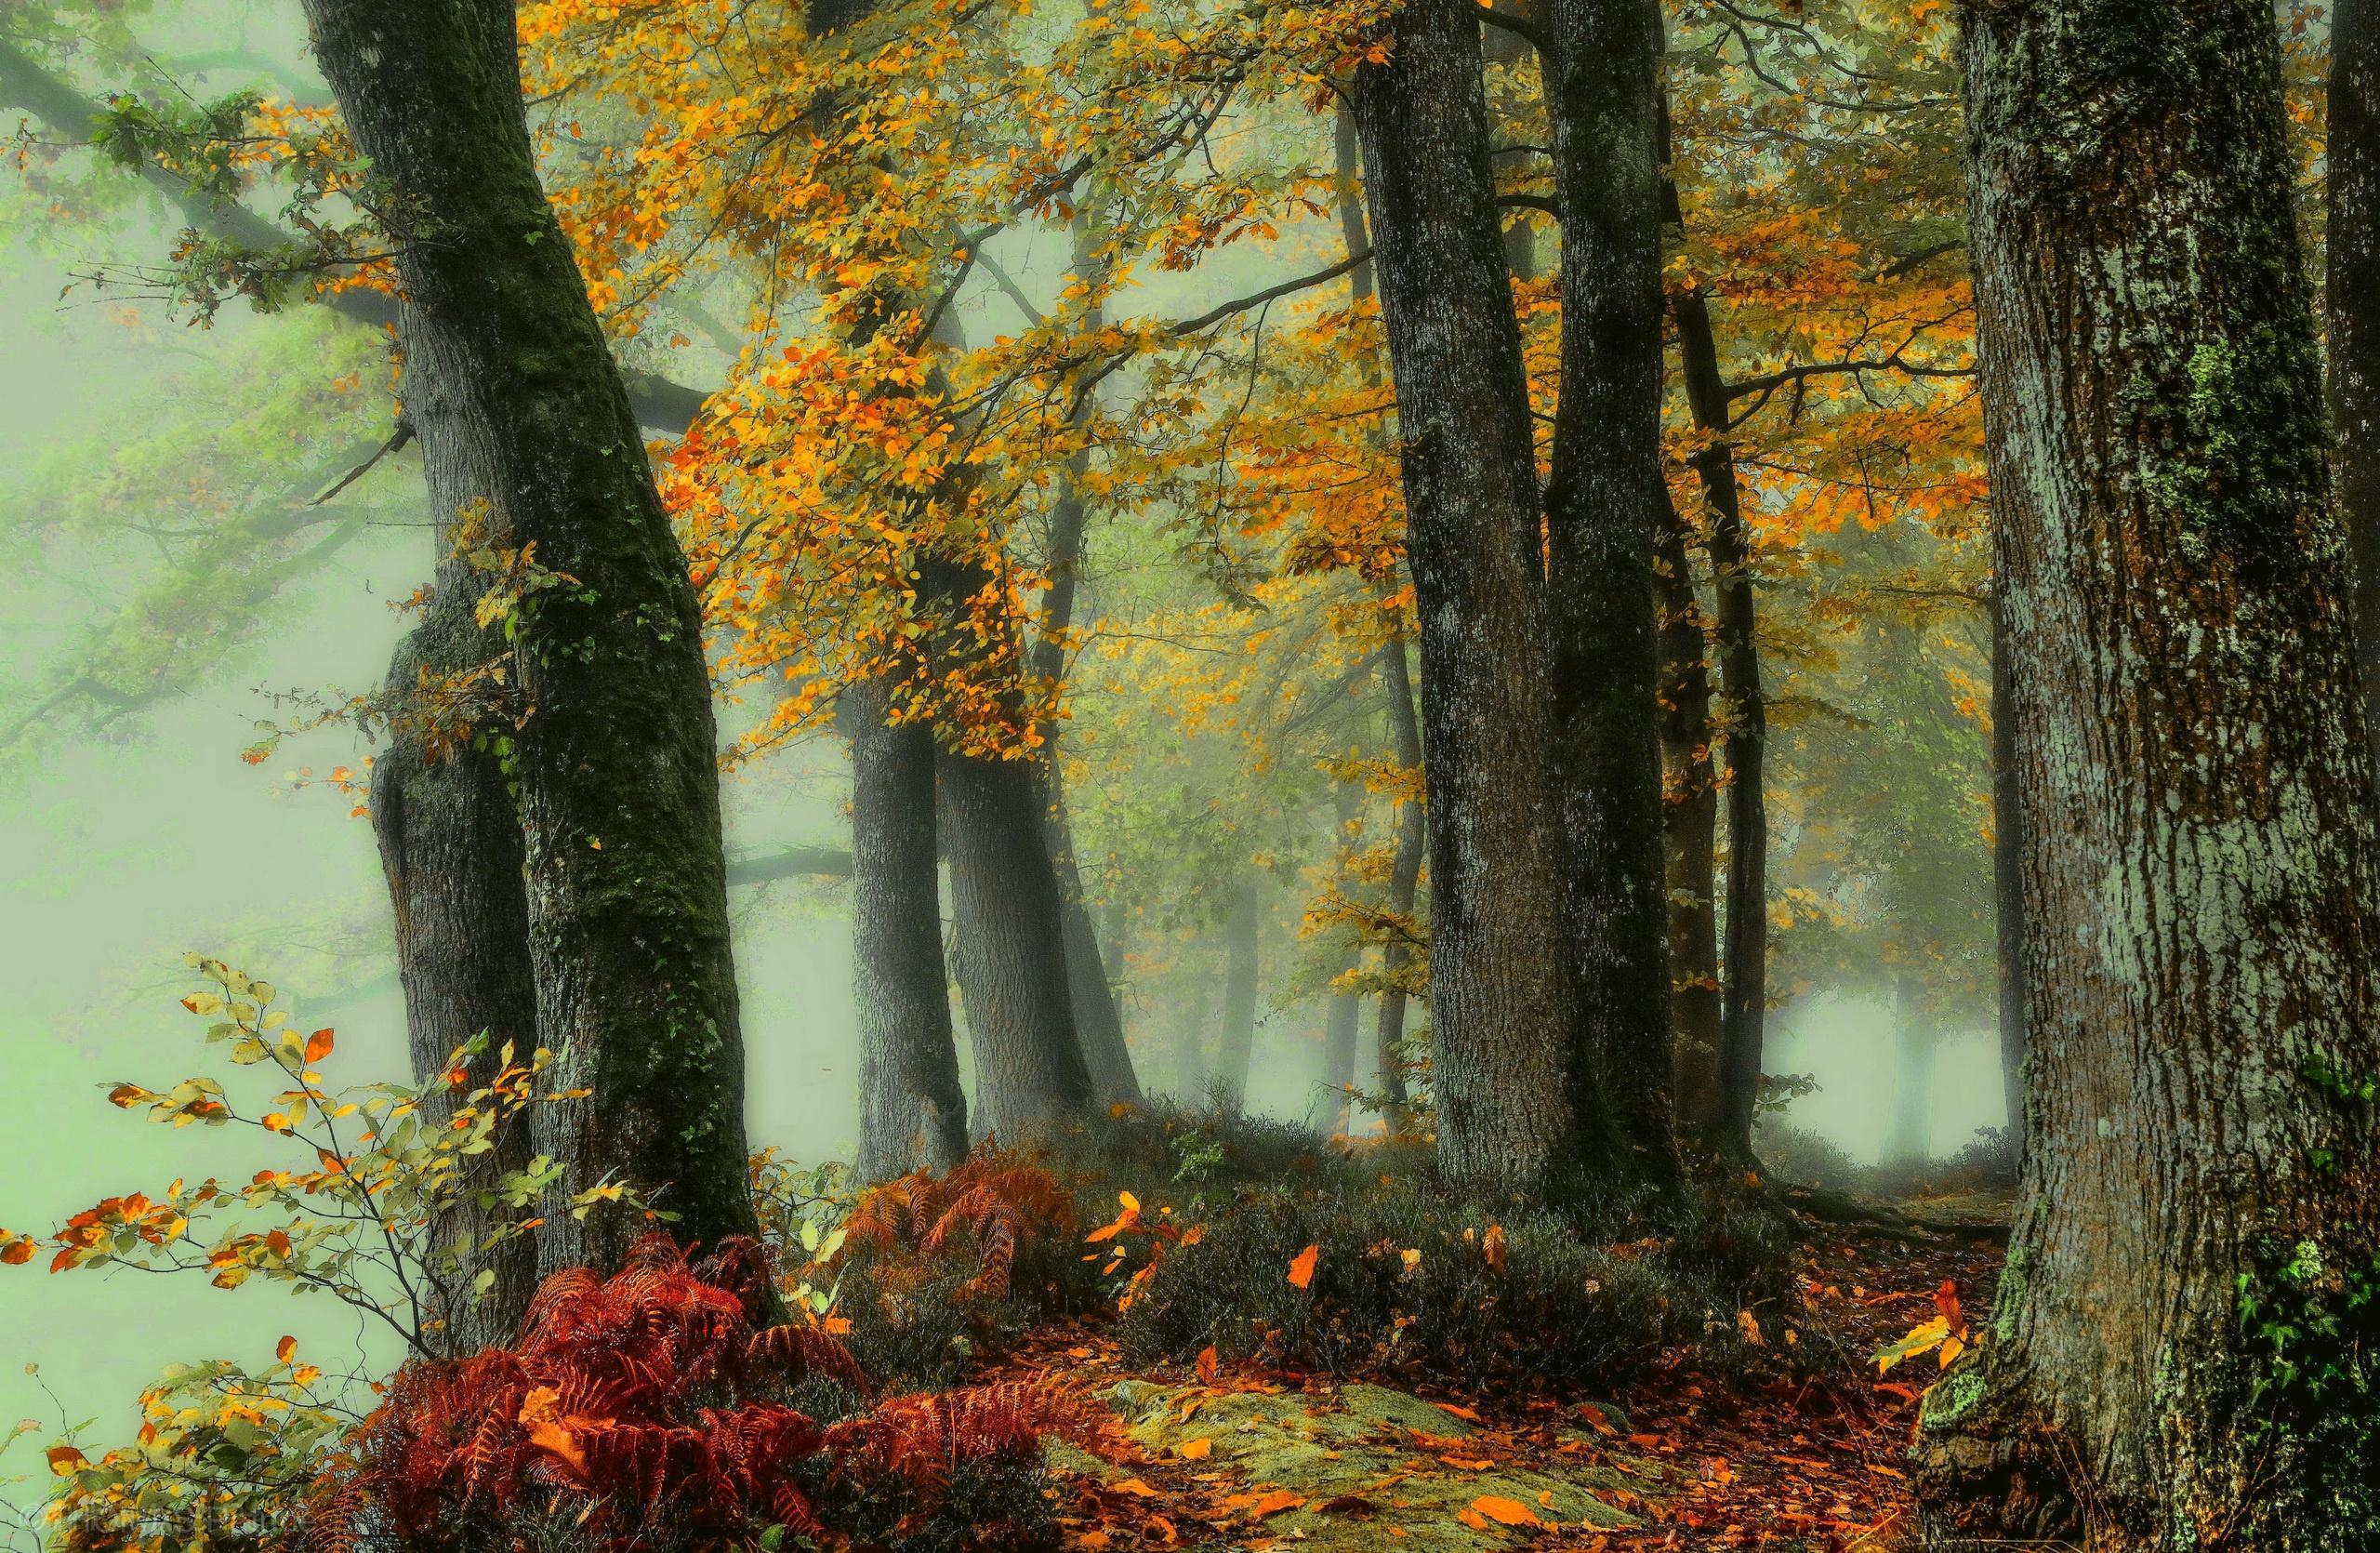 Misty Autumn Forest HD Wallpaper. Background Image